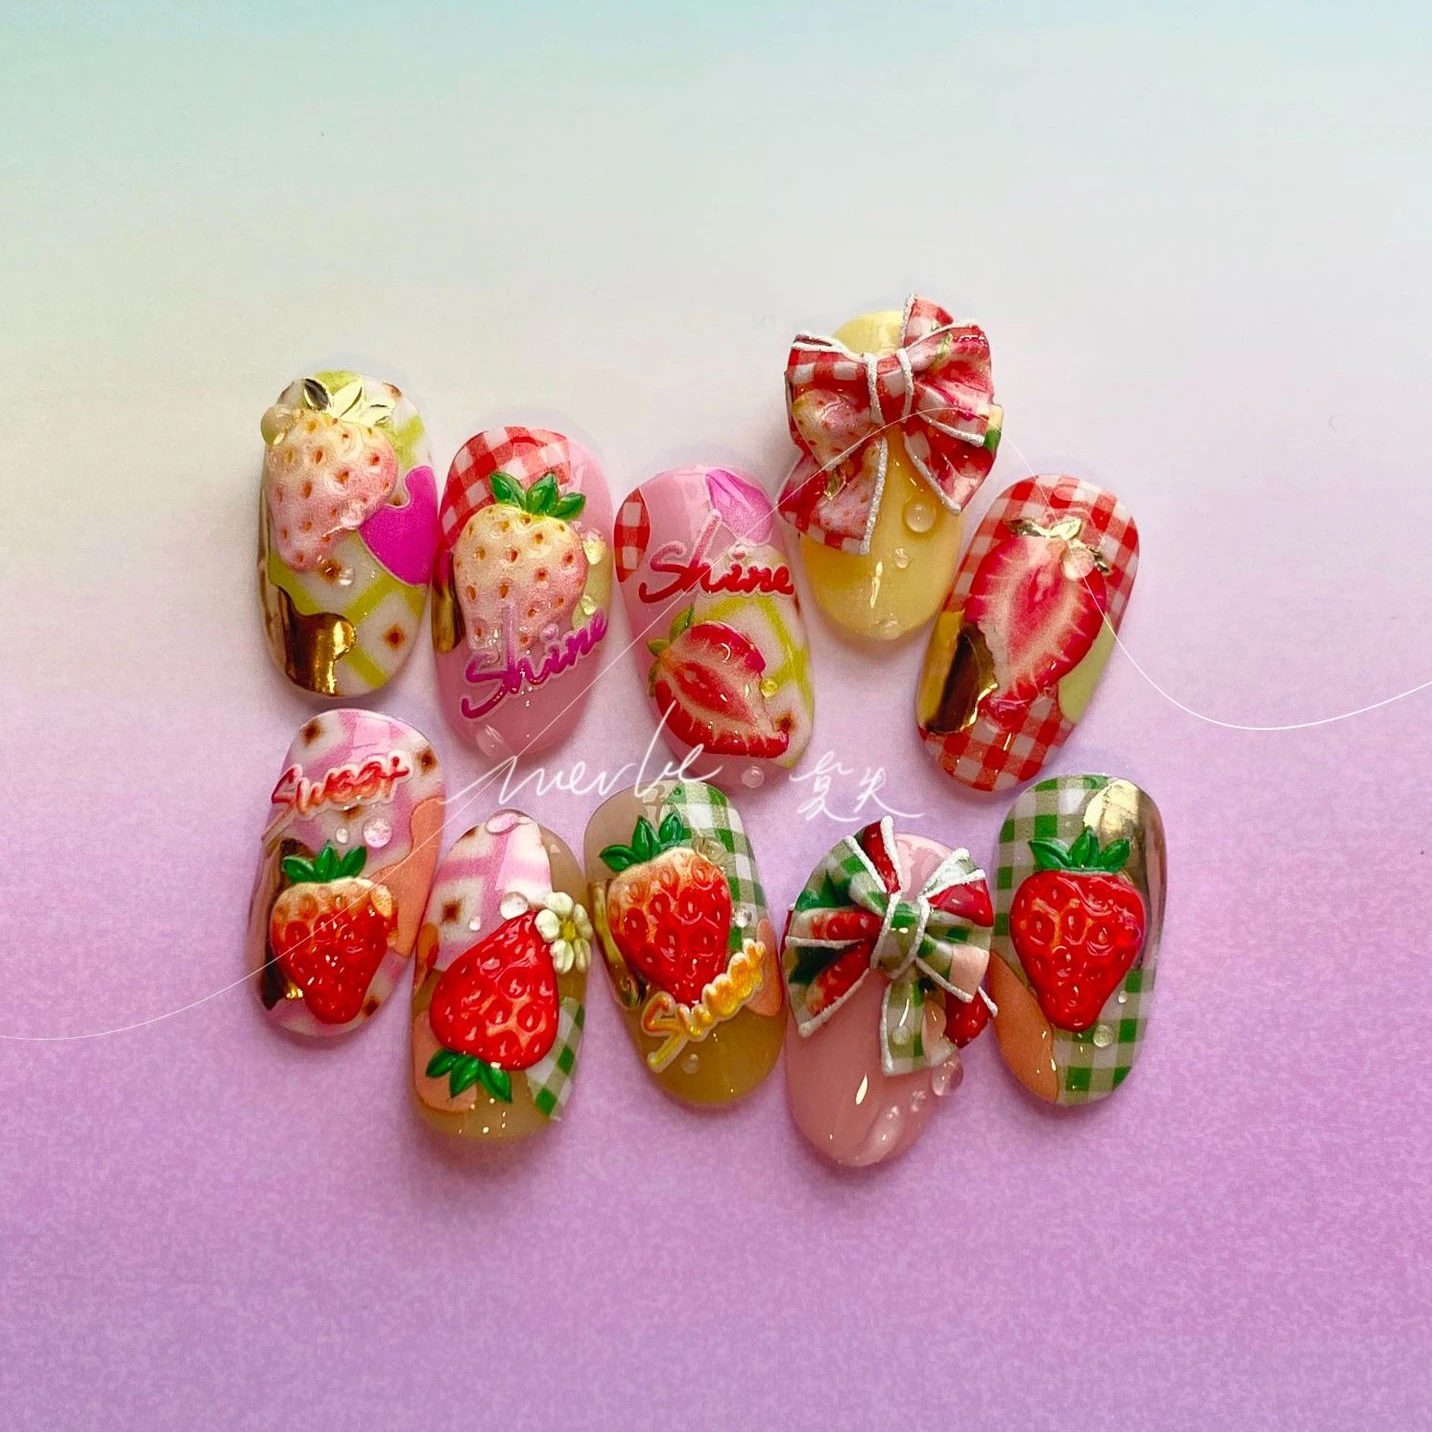 

Sweet Strawberry 5D Soft Embossed Reliefs Self Adhesive Nail Art Decorations Stickers Lovely Girl 3D Manicure Decals Wholesale